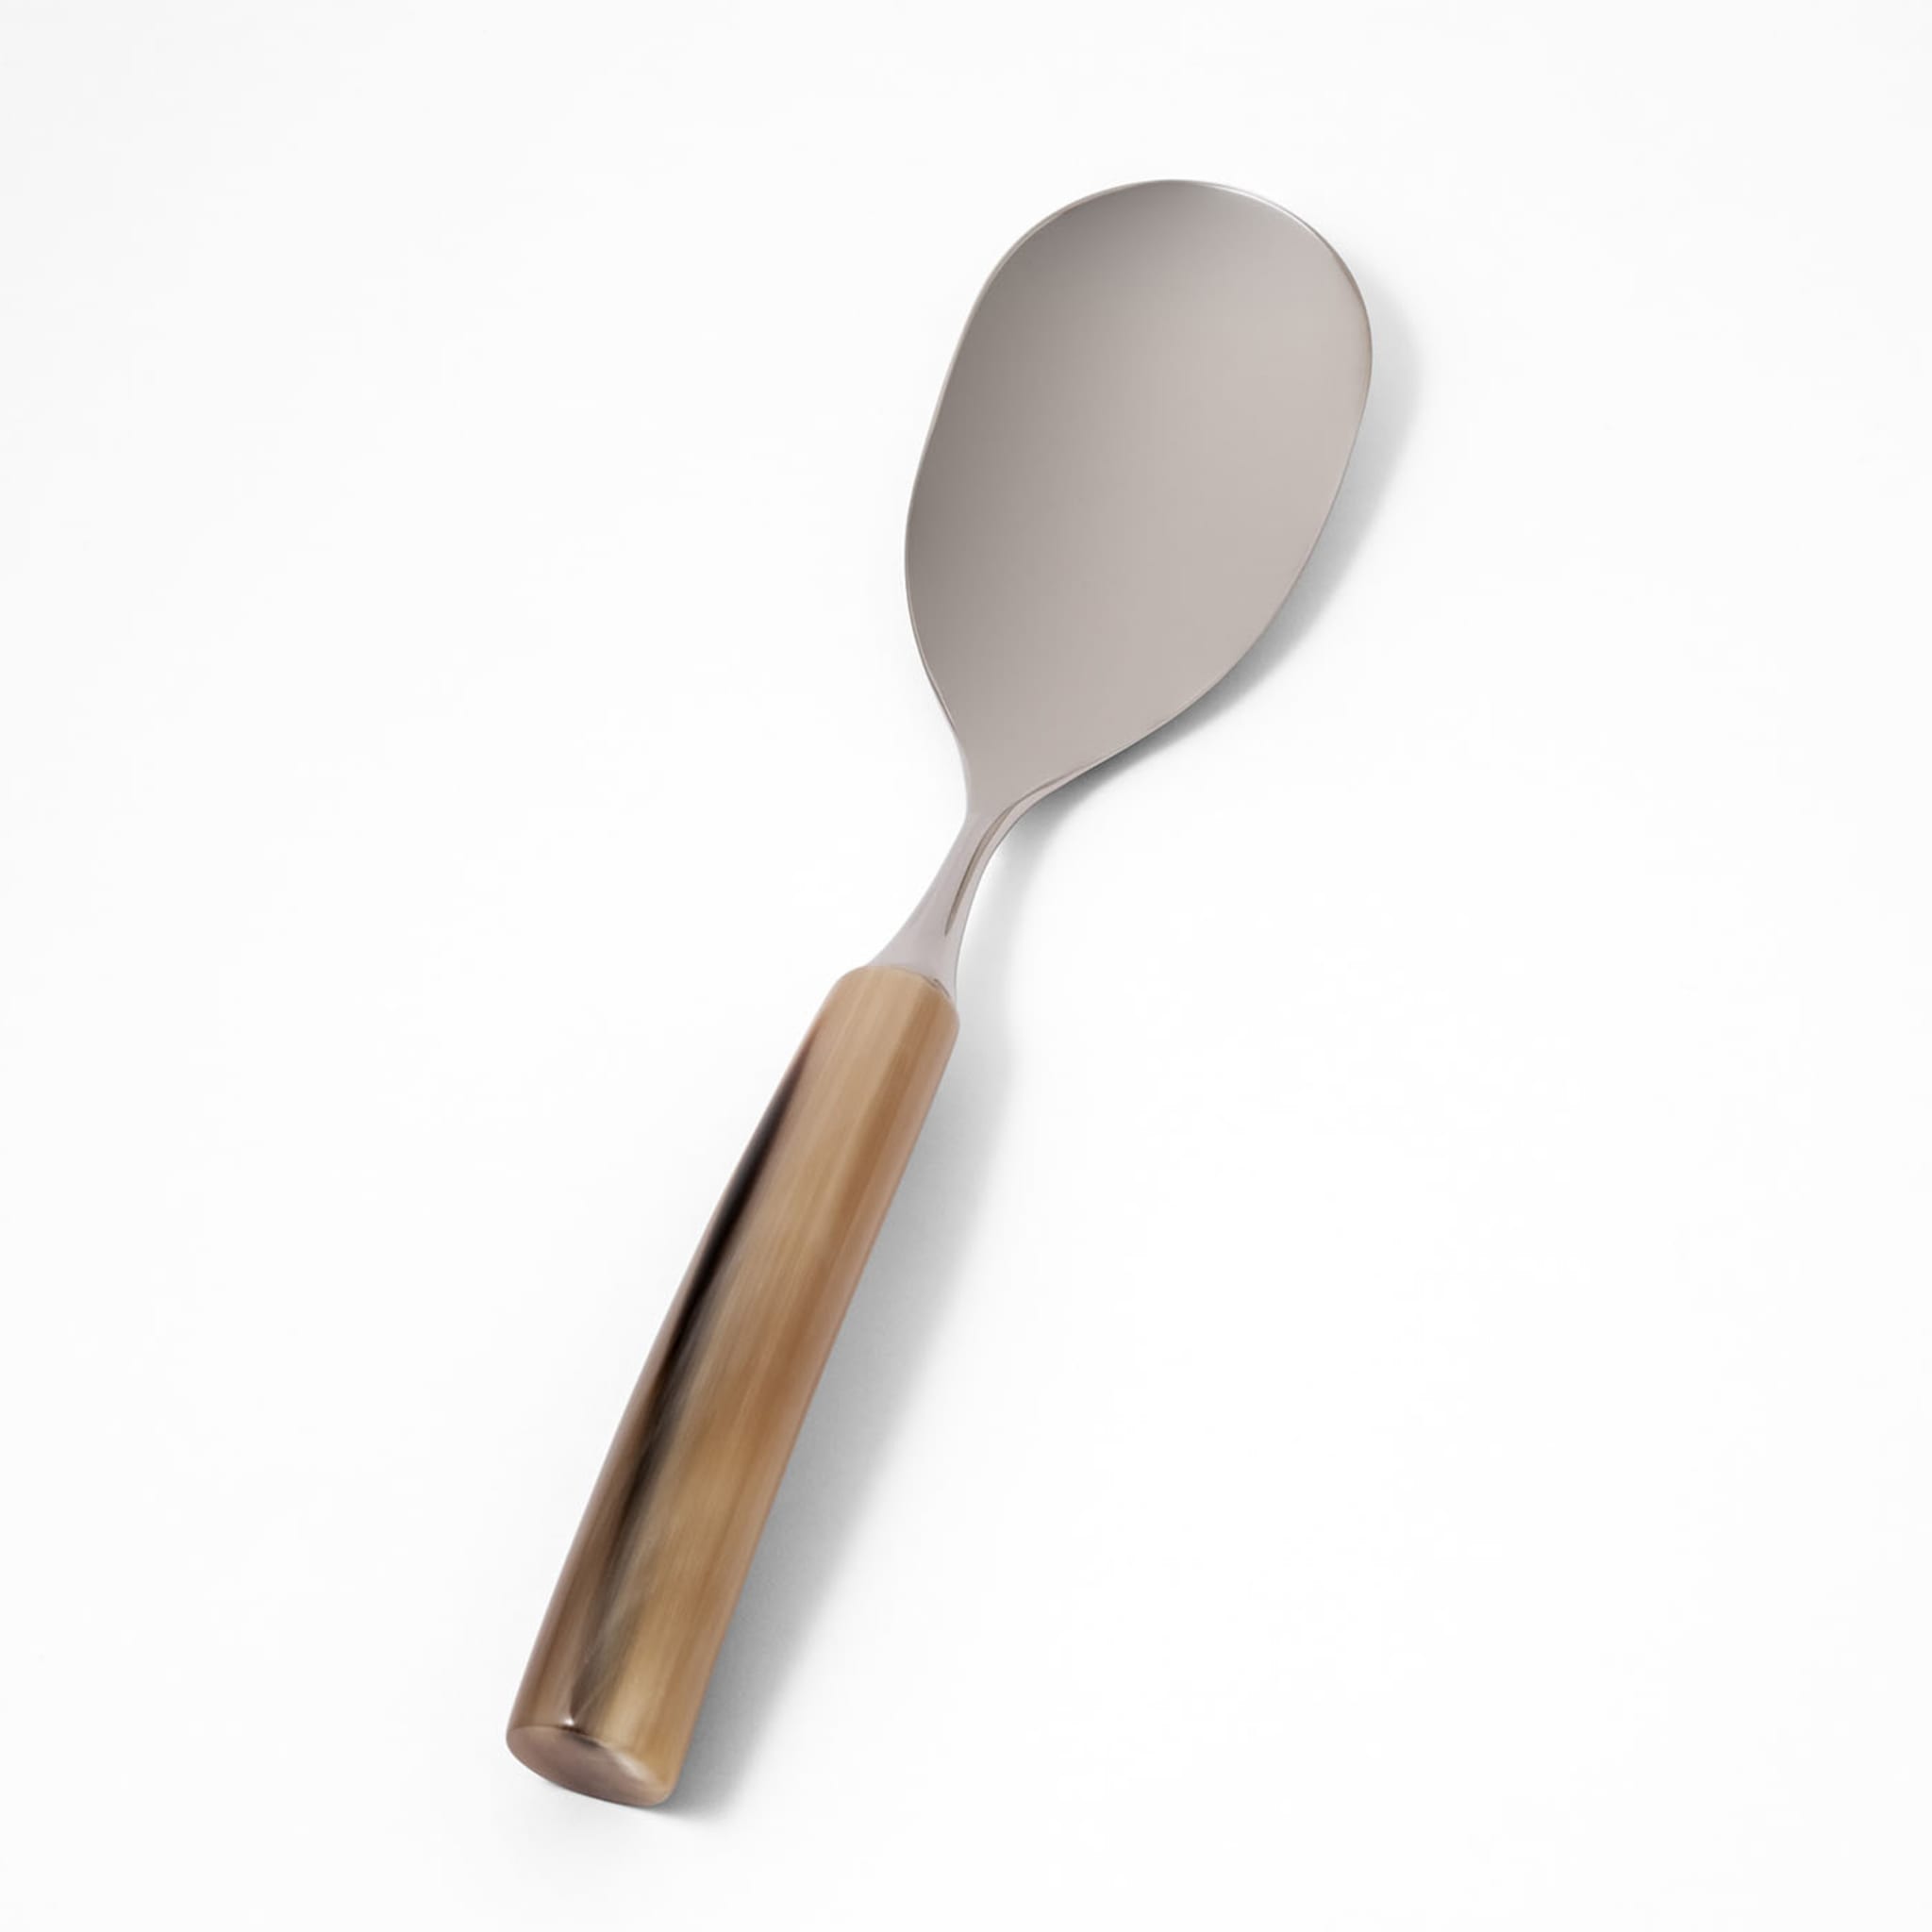 Risotto Spoon in Natural Horn - Alternative view 1